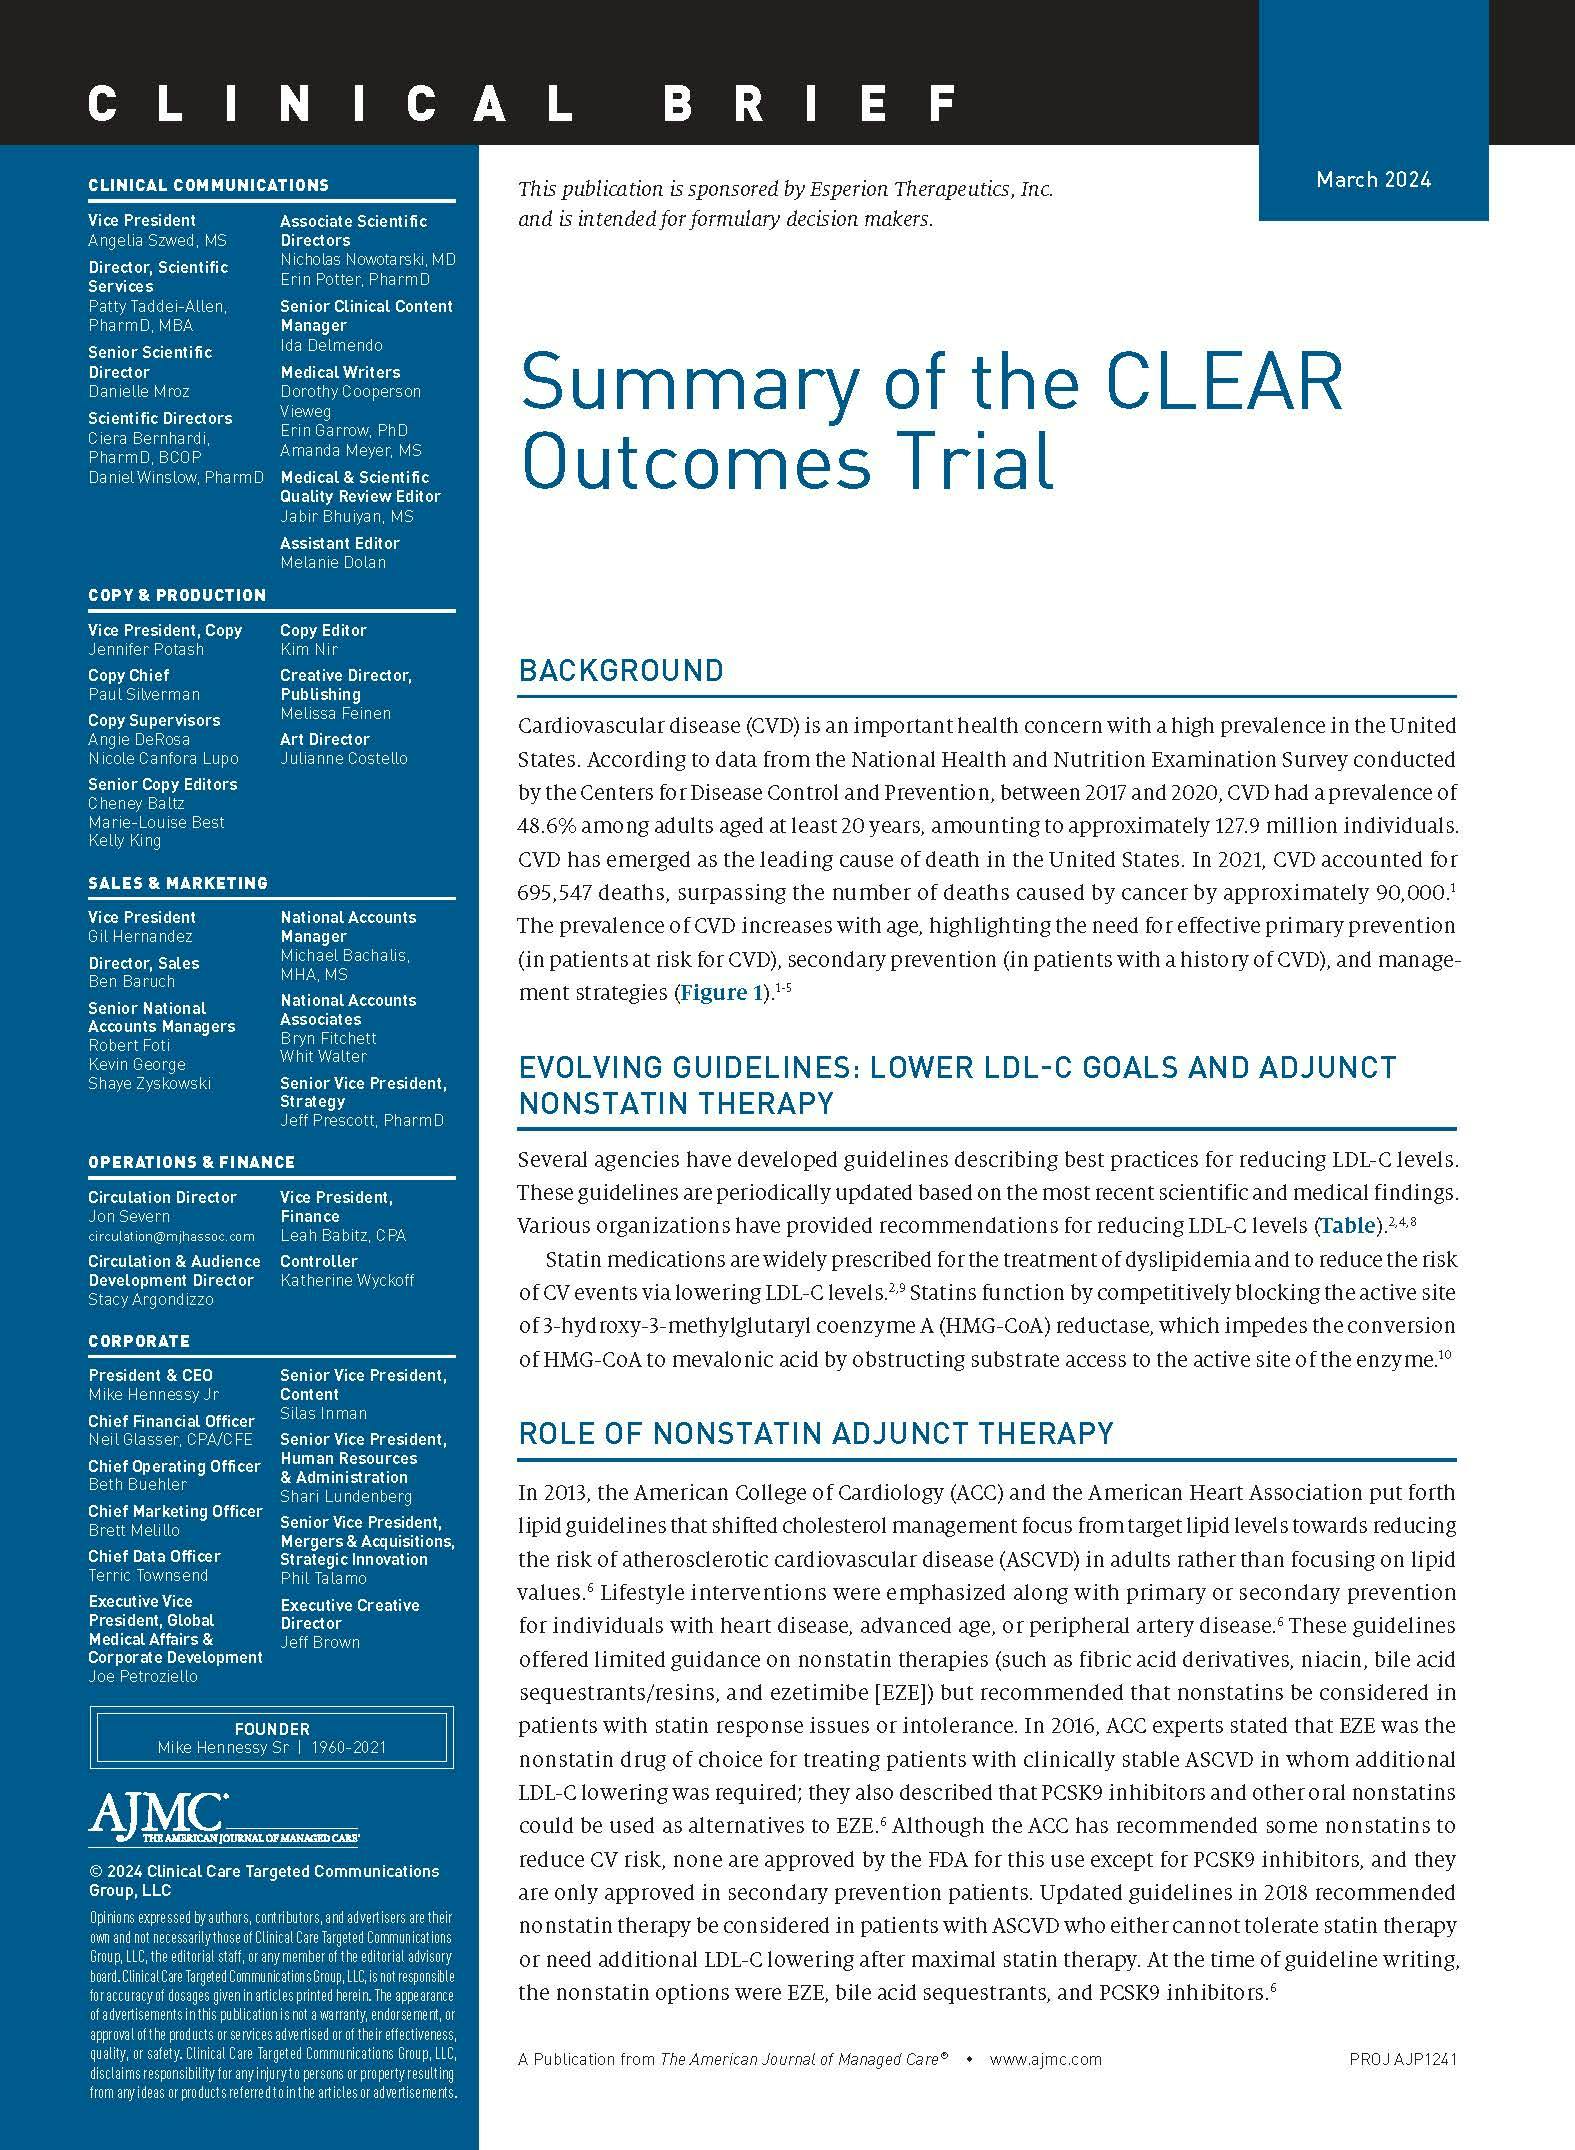 Summary of the CLEAR Outcomes Trial